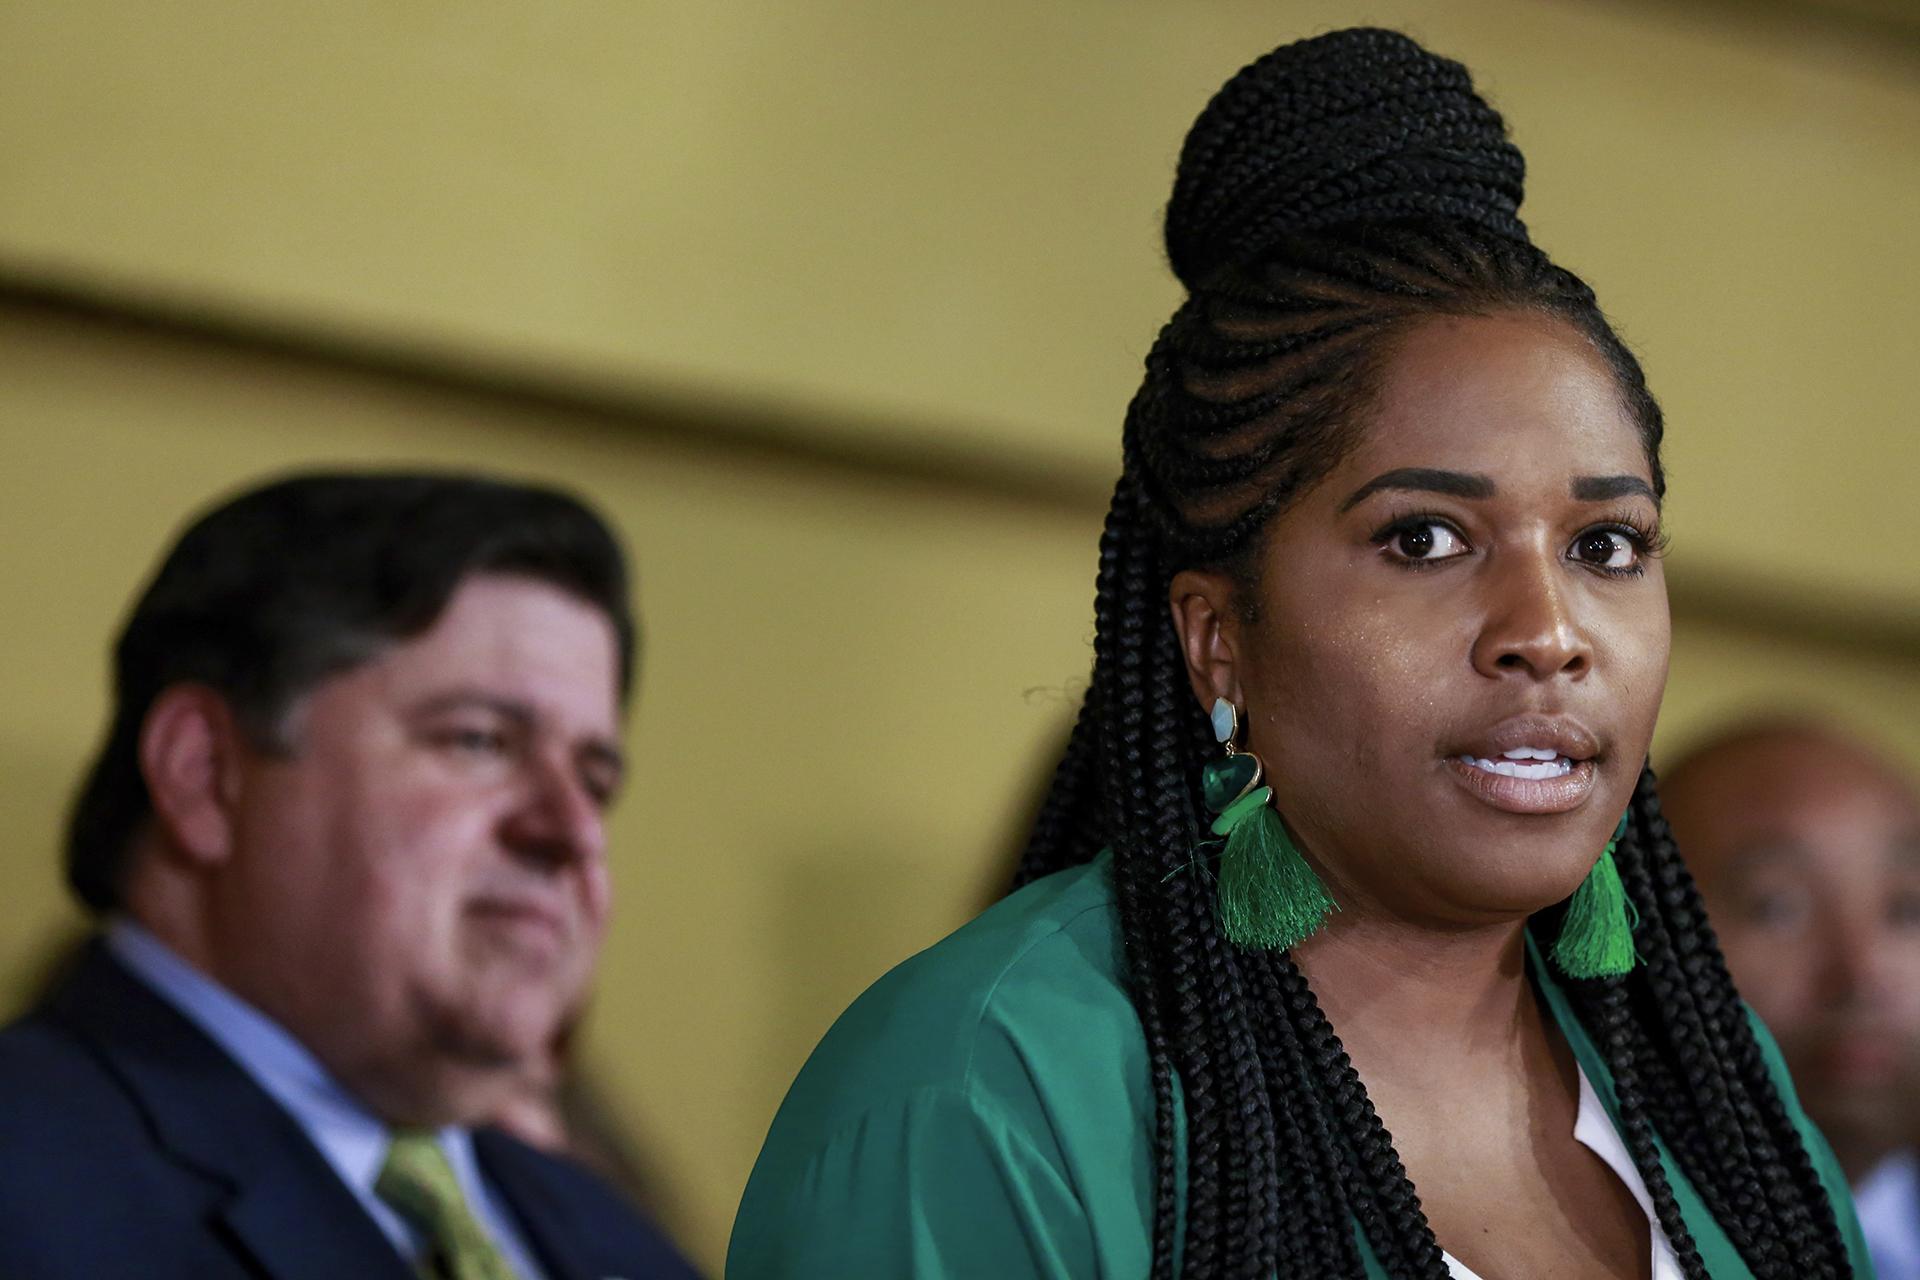 State Rep. Jehan Gordon-Booth, D-Peoria speaks during a news conference before Gov. J. B. Pritzker signs a bill that legalizes adult-use cannabis in the state of Illinois at Sankofa Cultural Arts and Business Center, Tuesday, June 25, 2019, in Chicago. (AP Photo / Amr Alfiky)